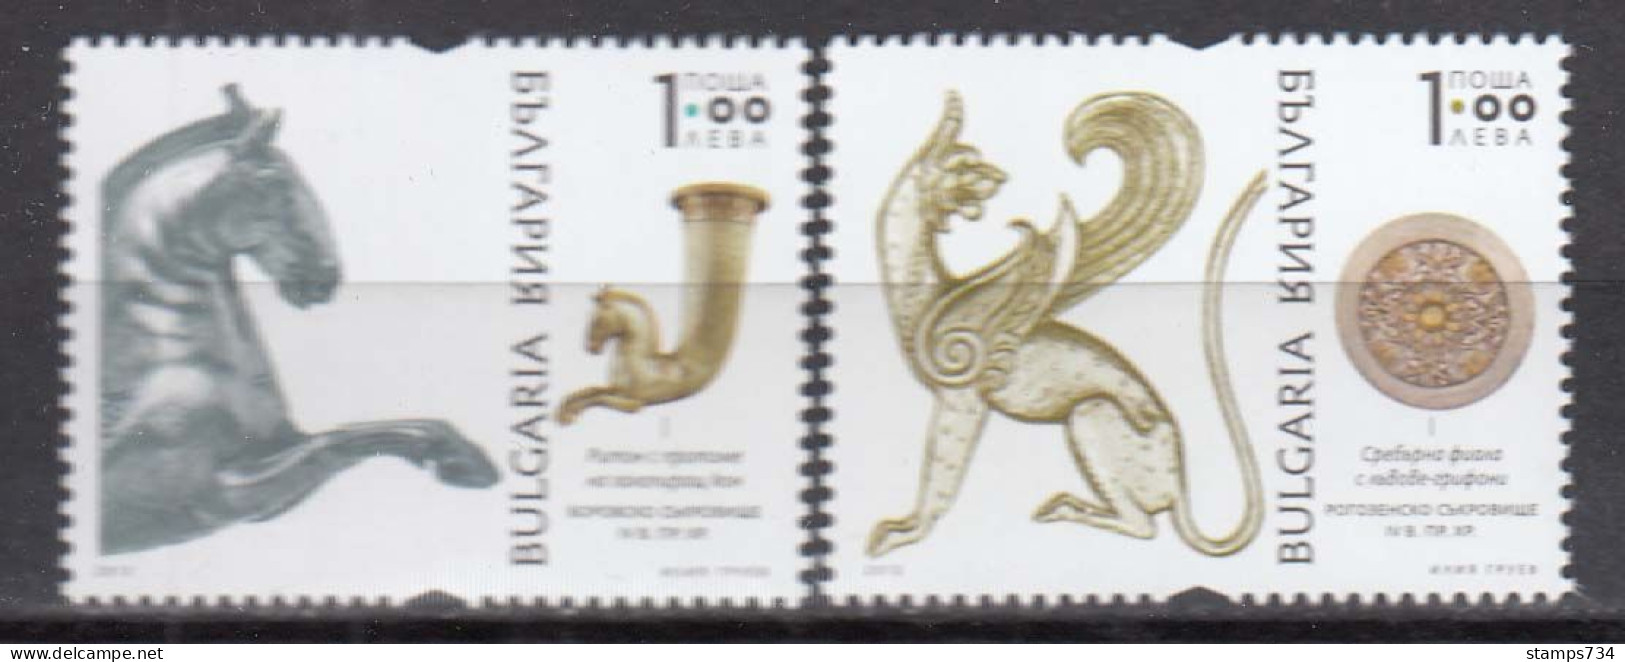 Bulgaria 2013 - Archeology: Items From The Borovo And Rogozen Treasures, Mi-Nr. 5126/27, MNH** - Unused Stamps